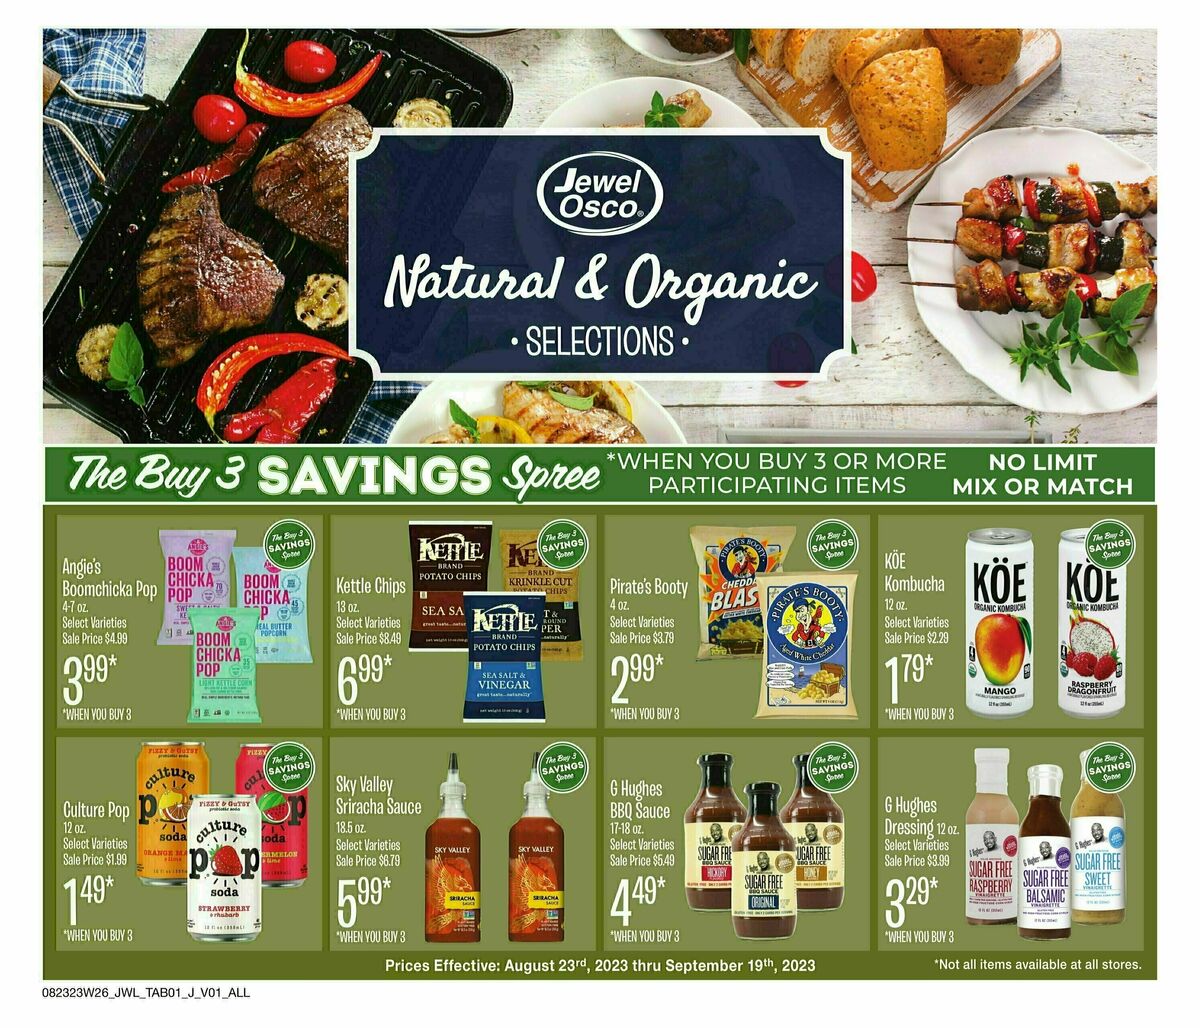 Jewel Osco Natural & Organics Weekly Ad from August 23